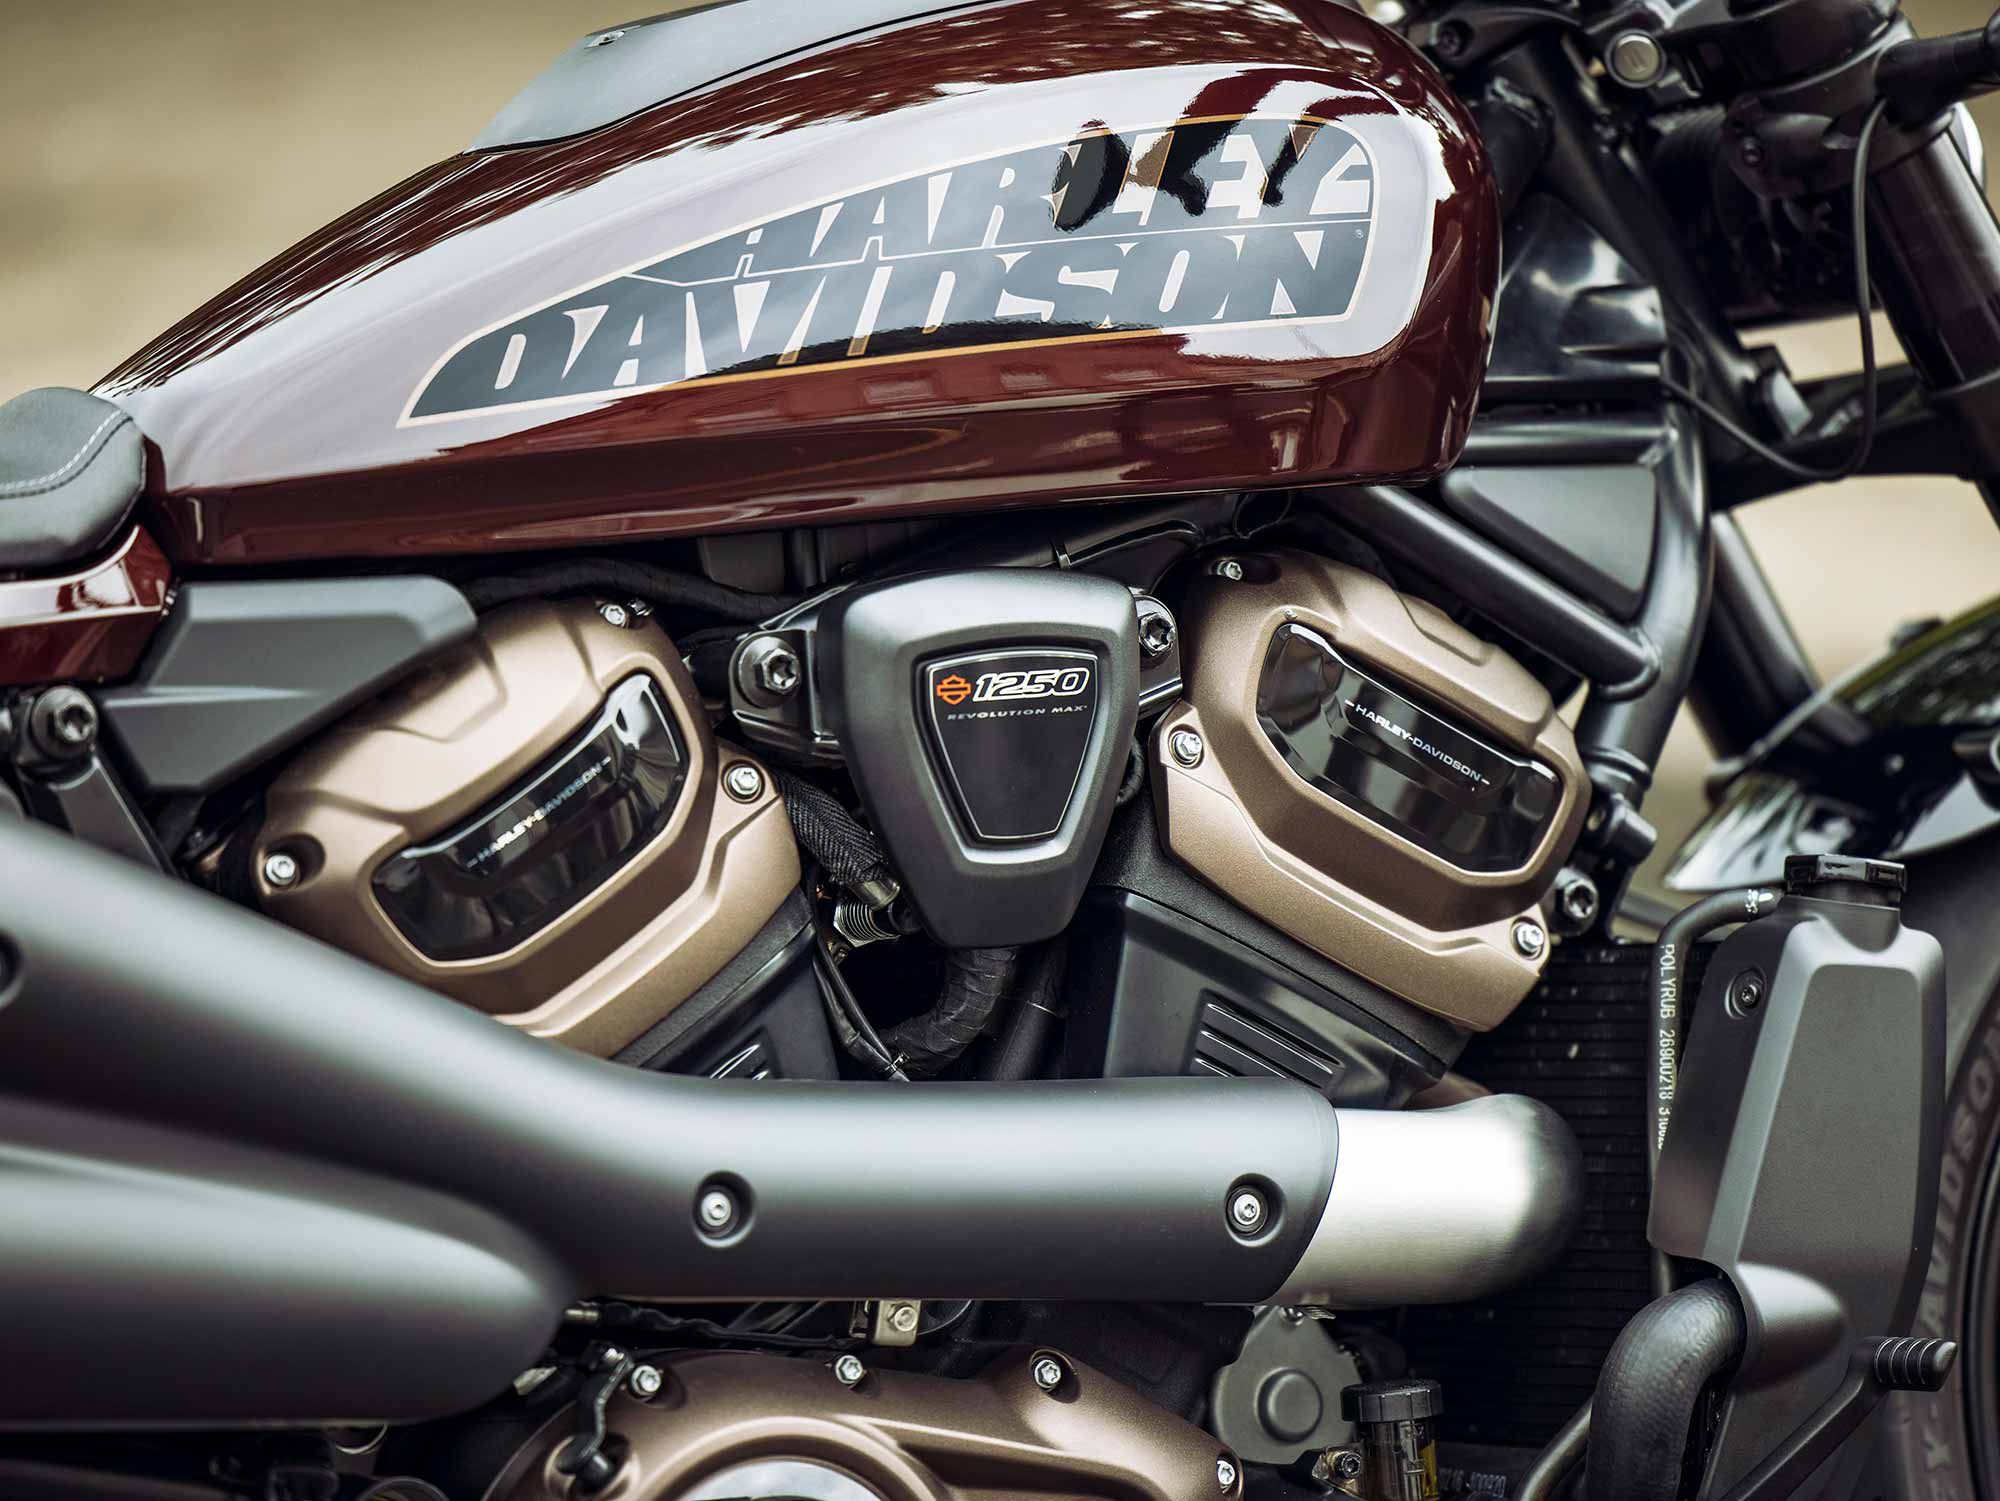 The beating heart is Harley’s new Revolution Max 1250 V-twin, tuned specifically for the Sportster S.